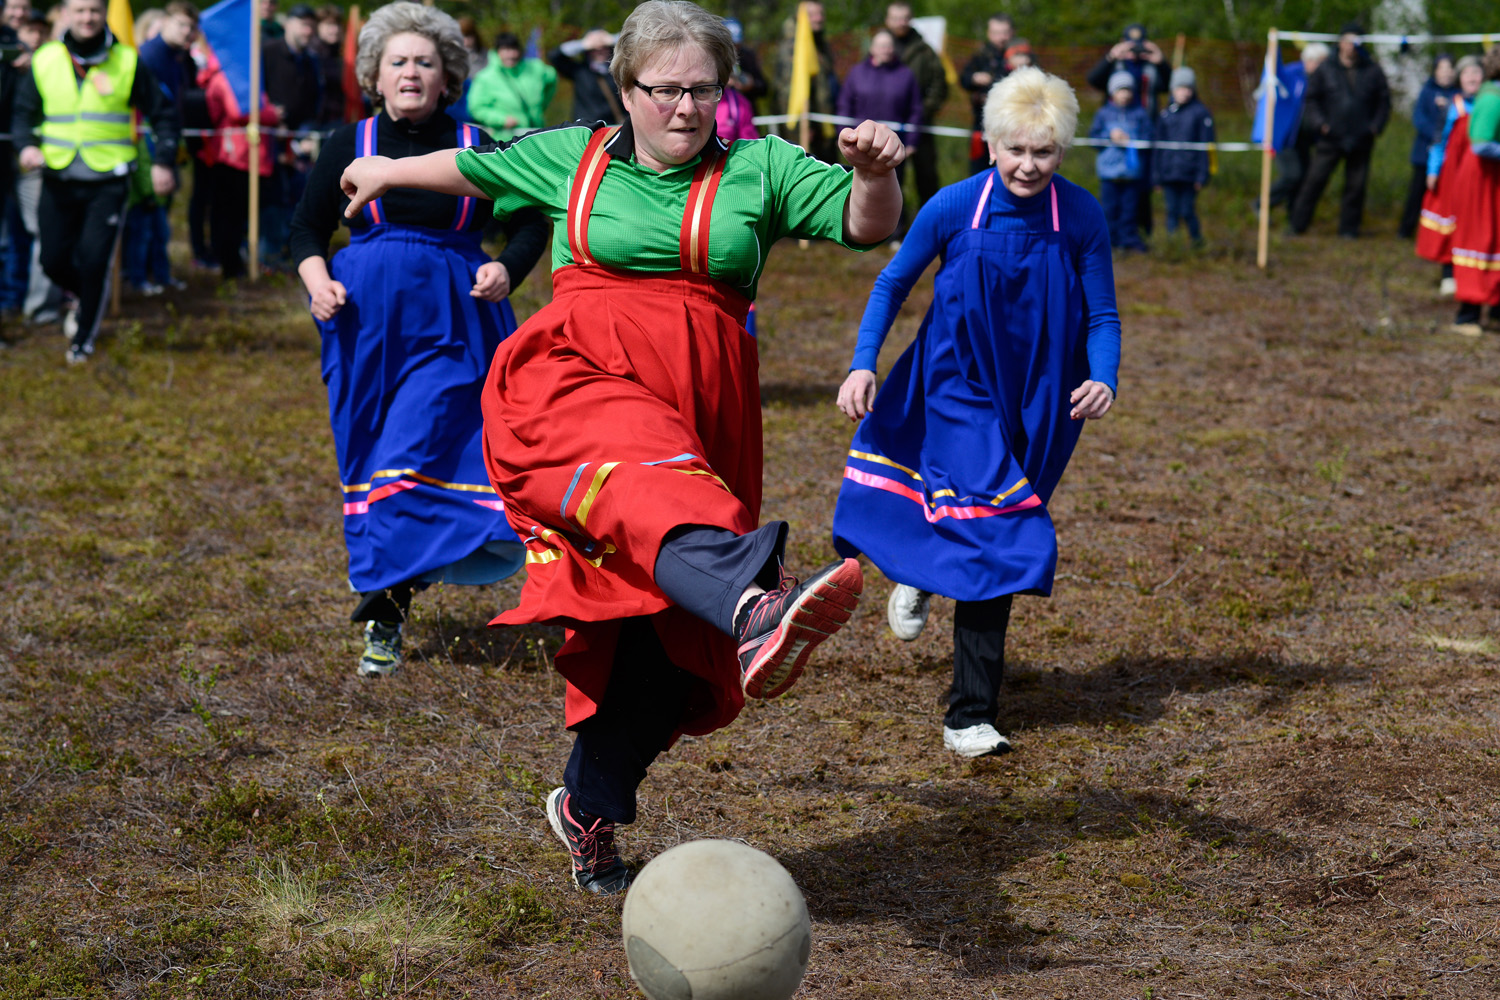 The contests include jumping through wooden sledges, crossbow shooting, lassoing ferrets, running with a stick on uneven terrain, rowing, and Saami football.